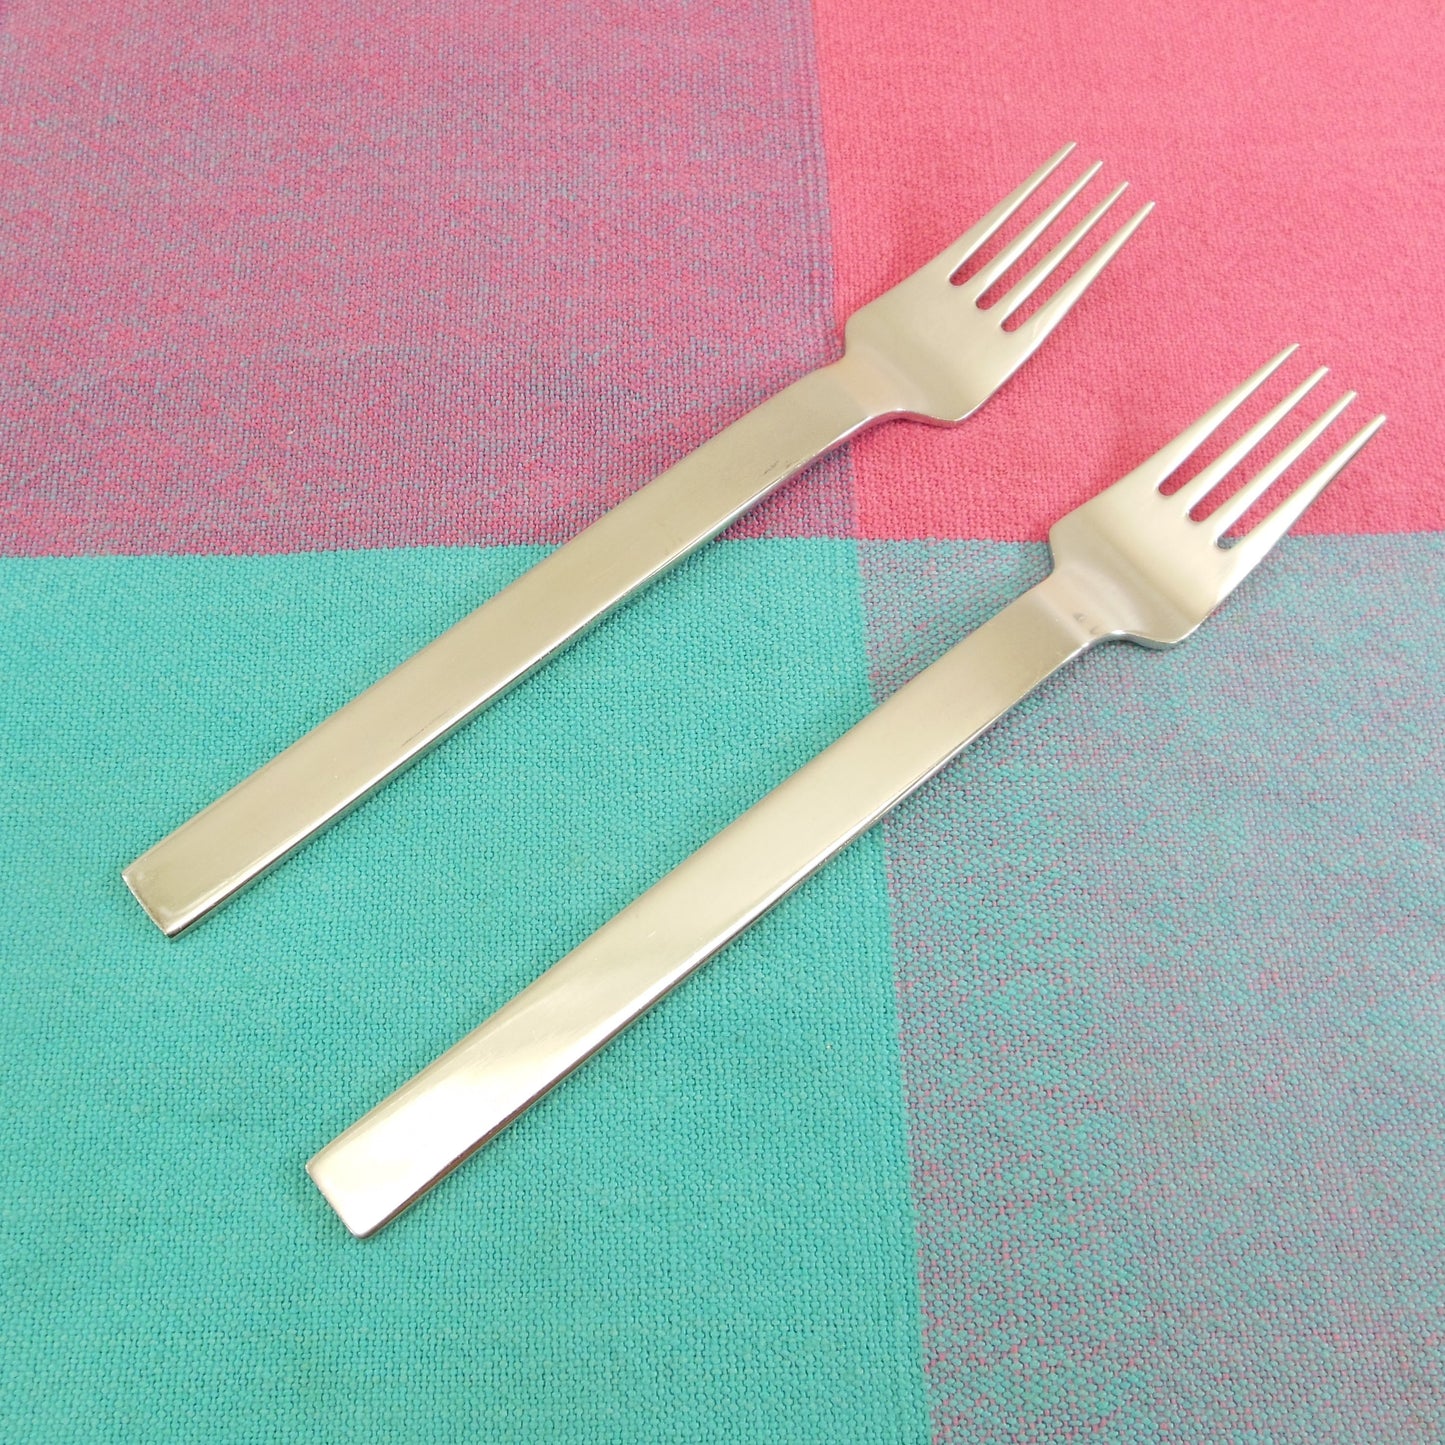 Wallace Trenton Stainless Flatware - Your Choice - Sold In Pairs